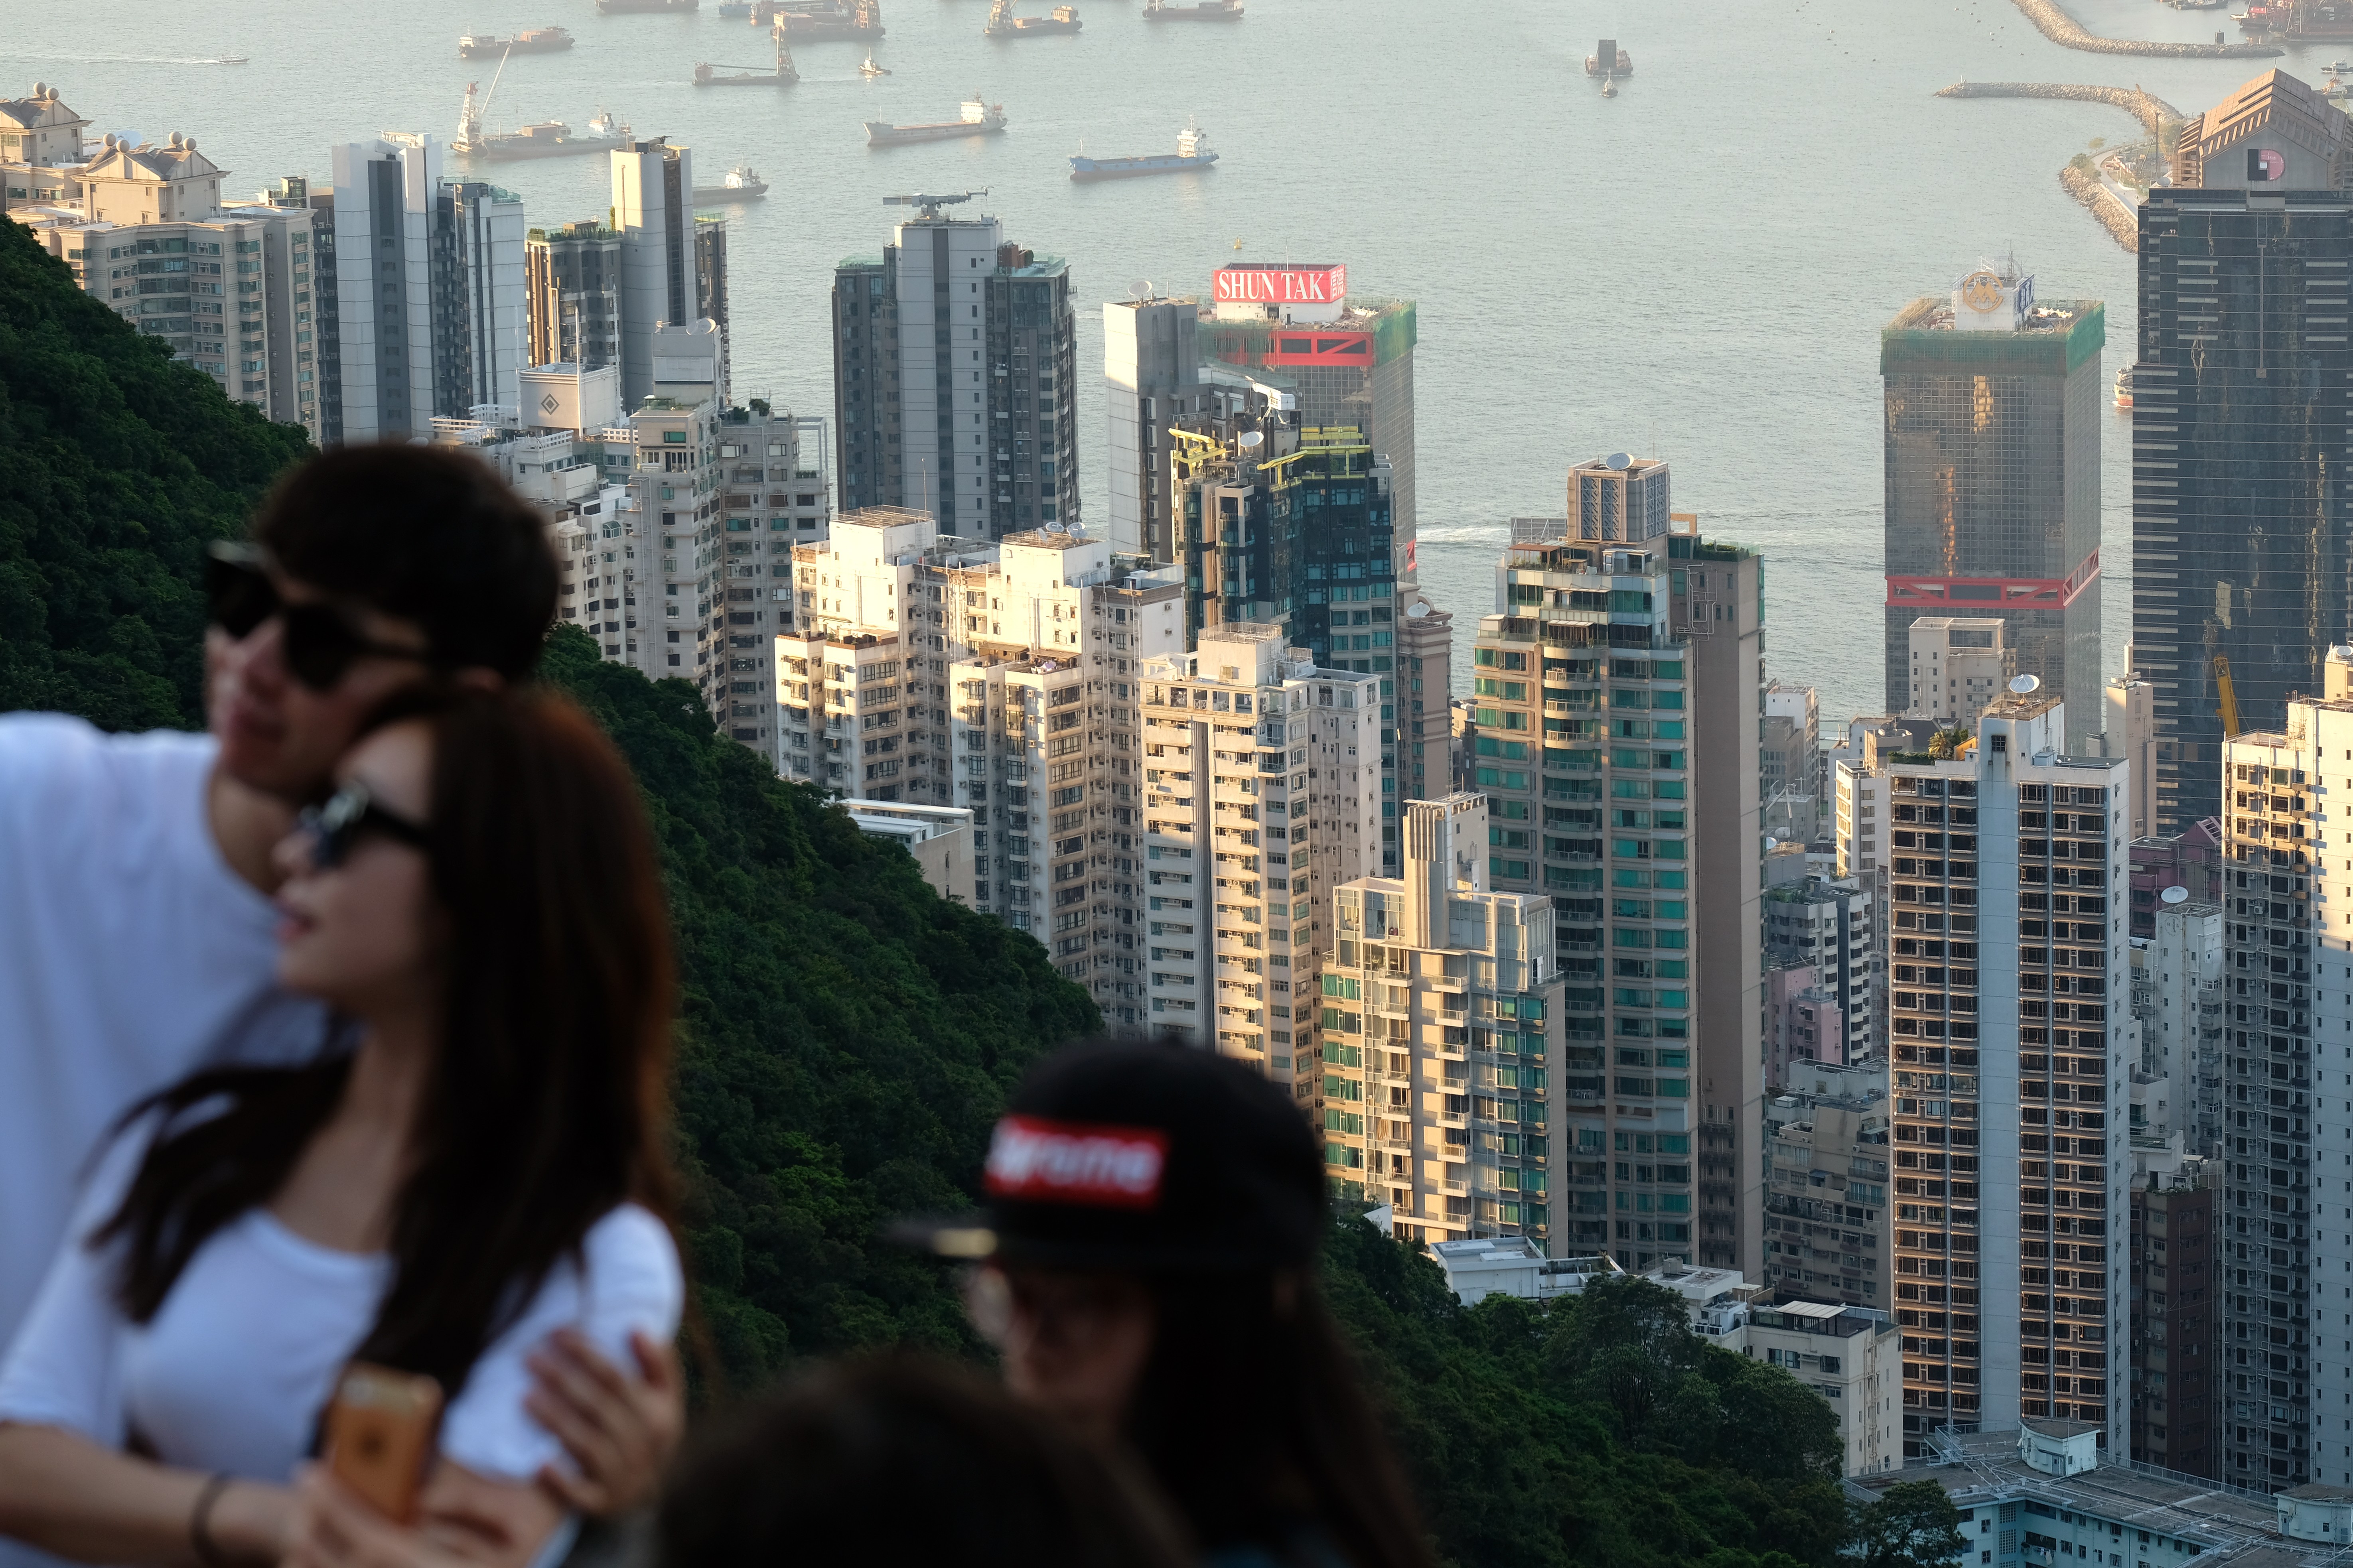 Young people are increasingly priced out of Hong Kong’s housing market, becoming a major source of grievance. Photo: Fung Chang